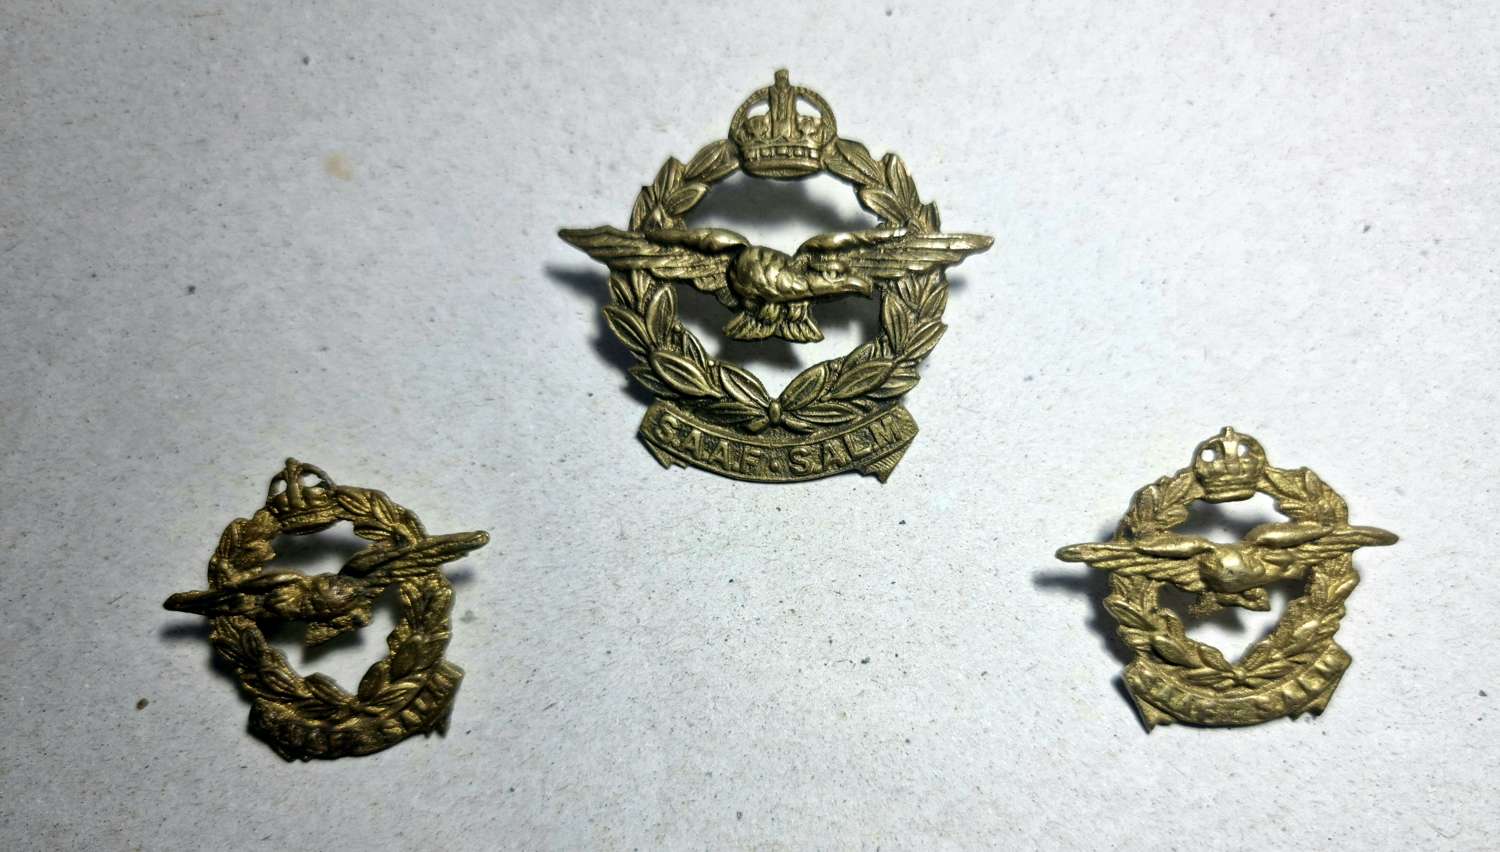 WW2 South African Air Force Cap badge and Collar dogs